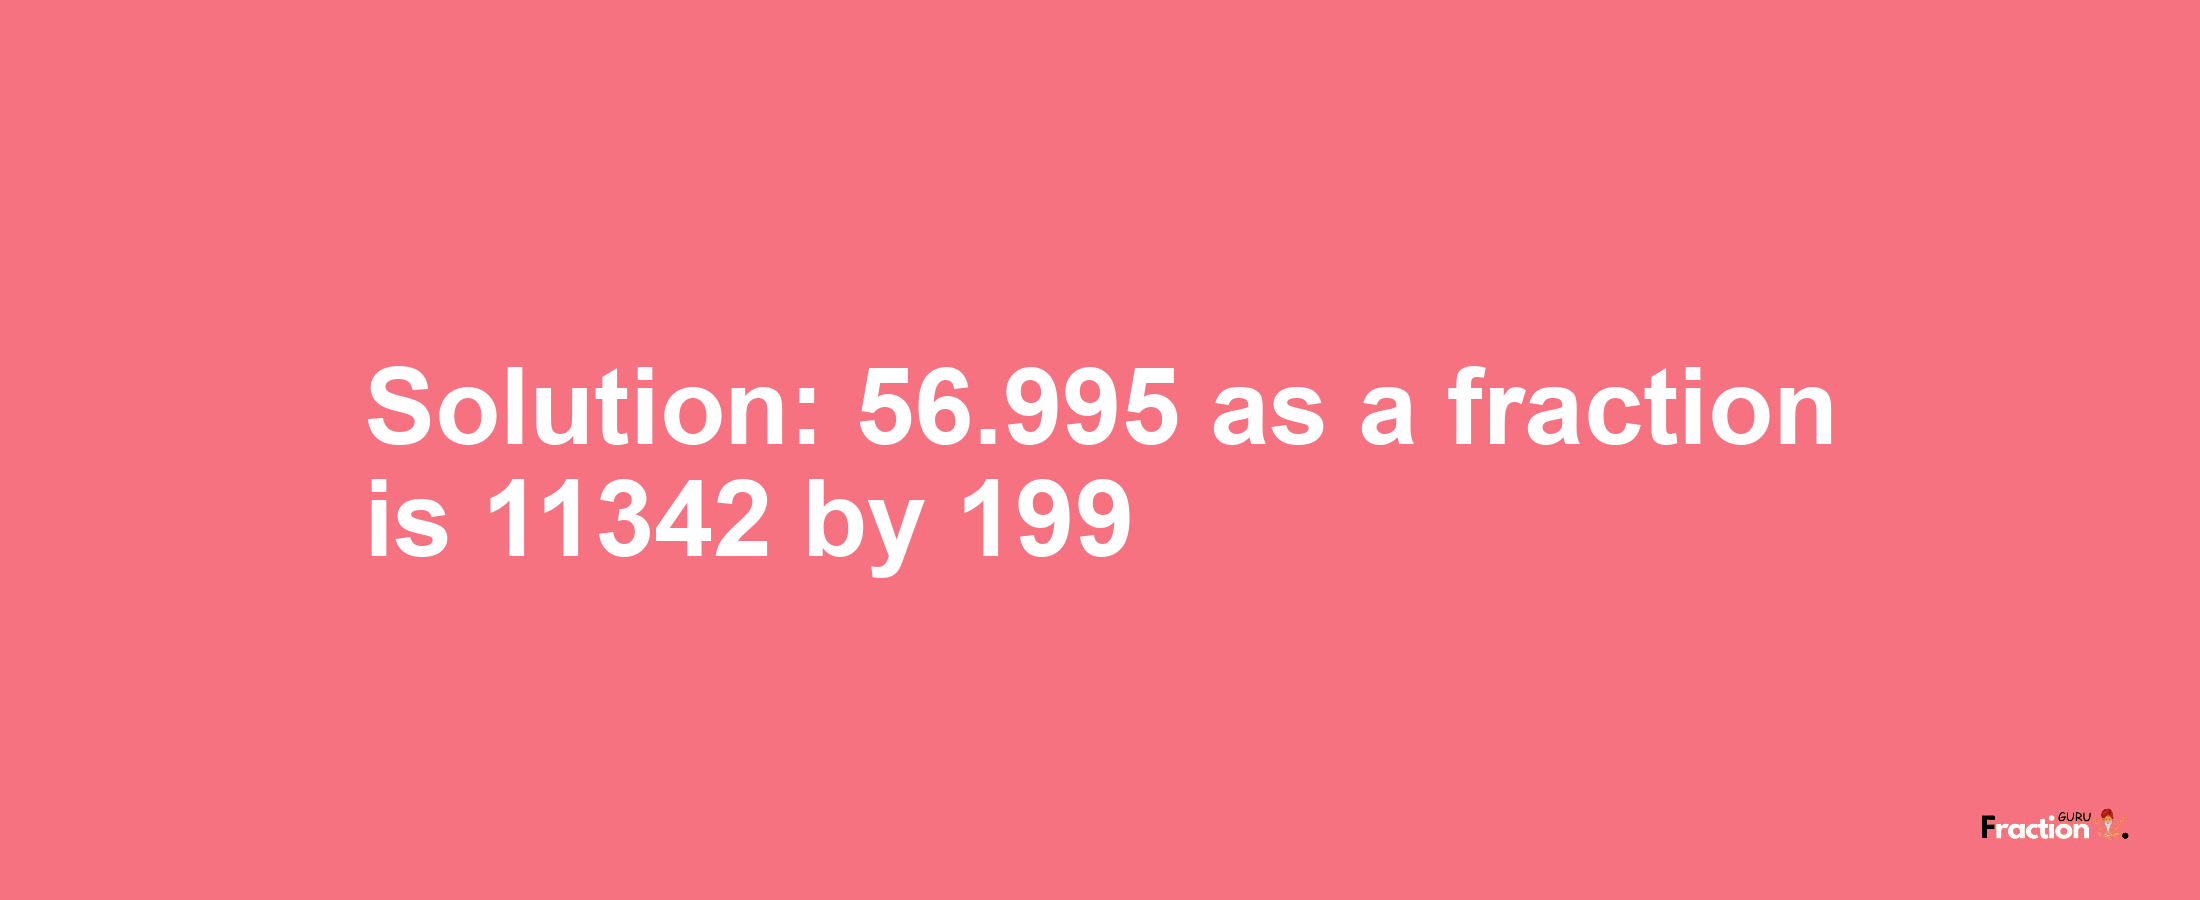 Solution:56.995 as a fraction is 11342/199